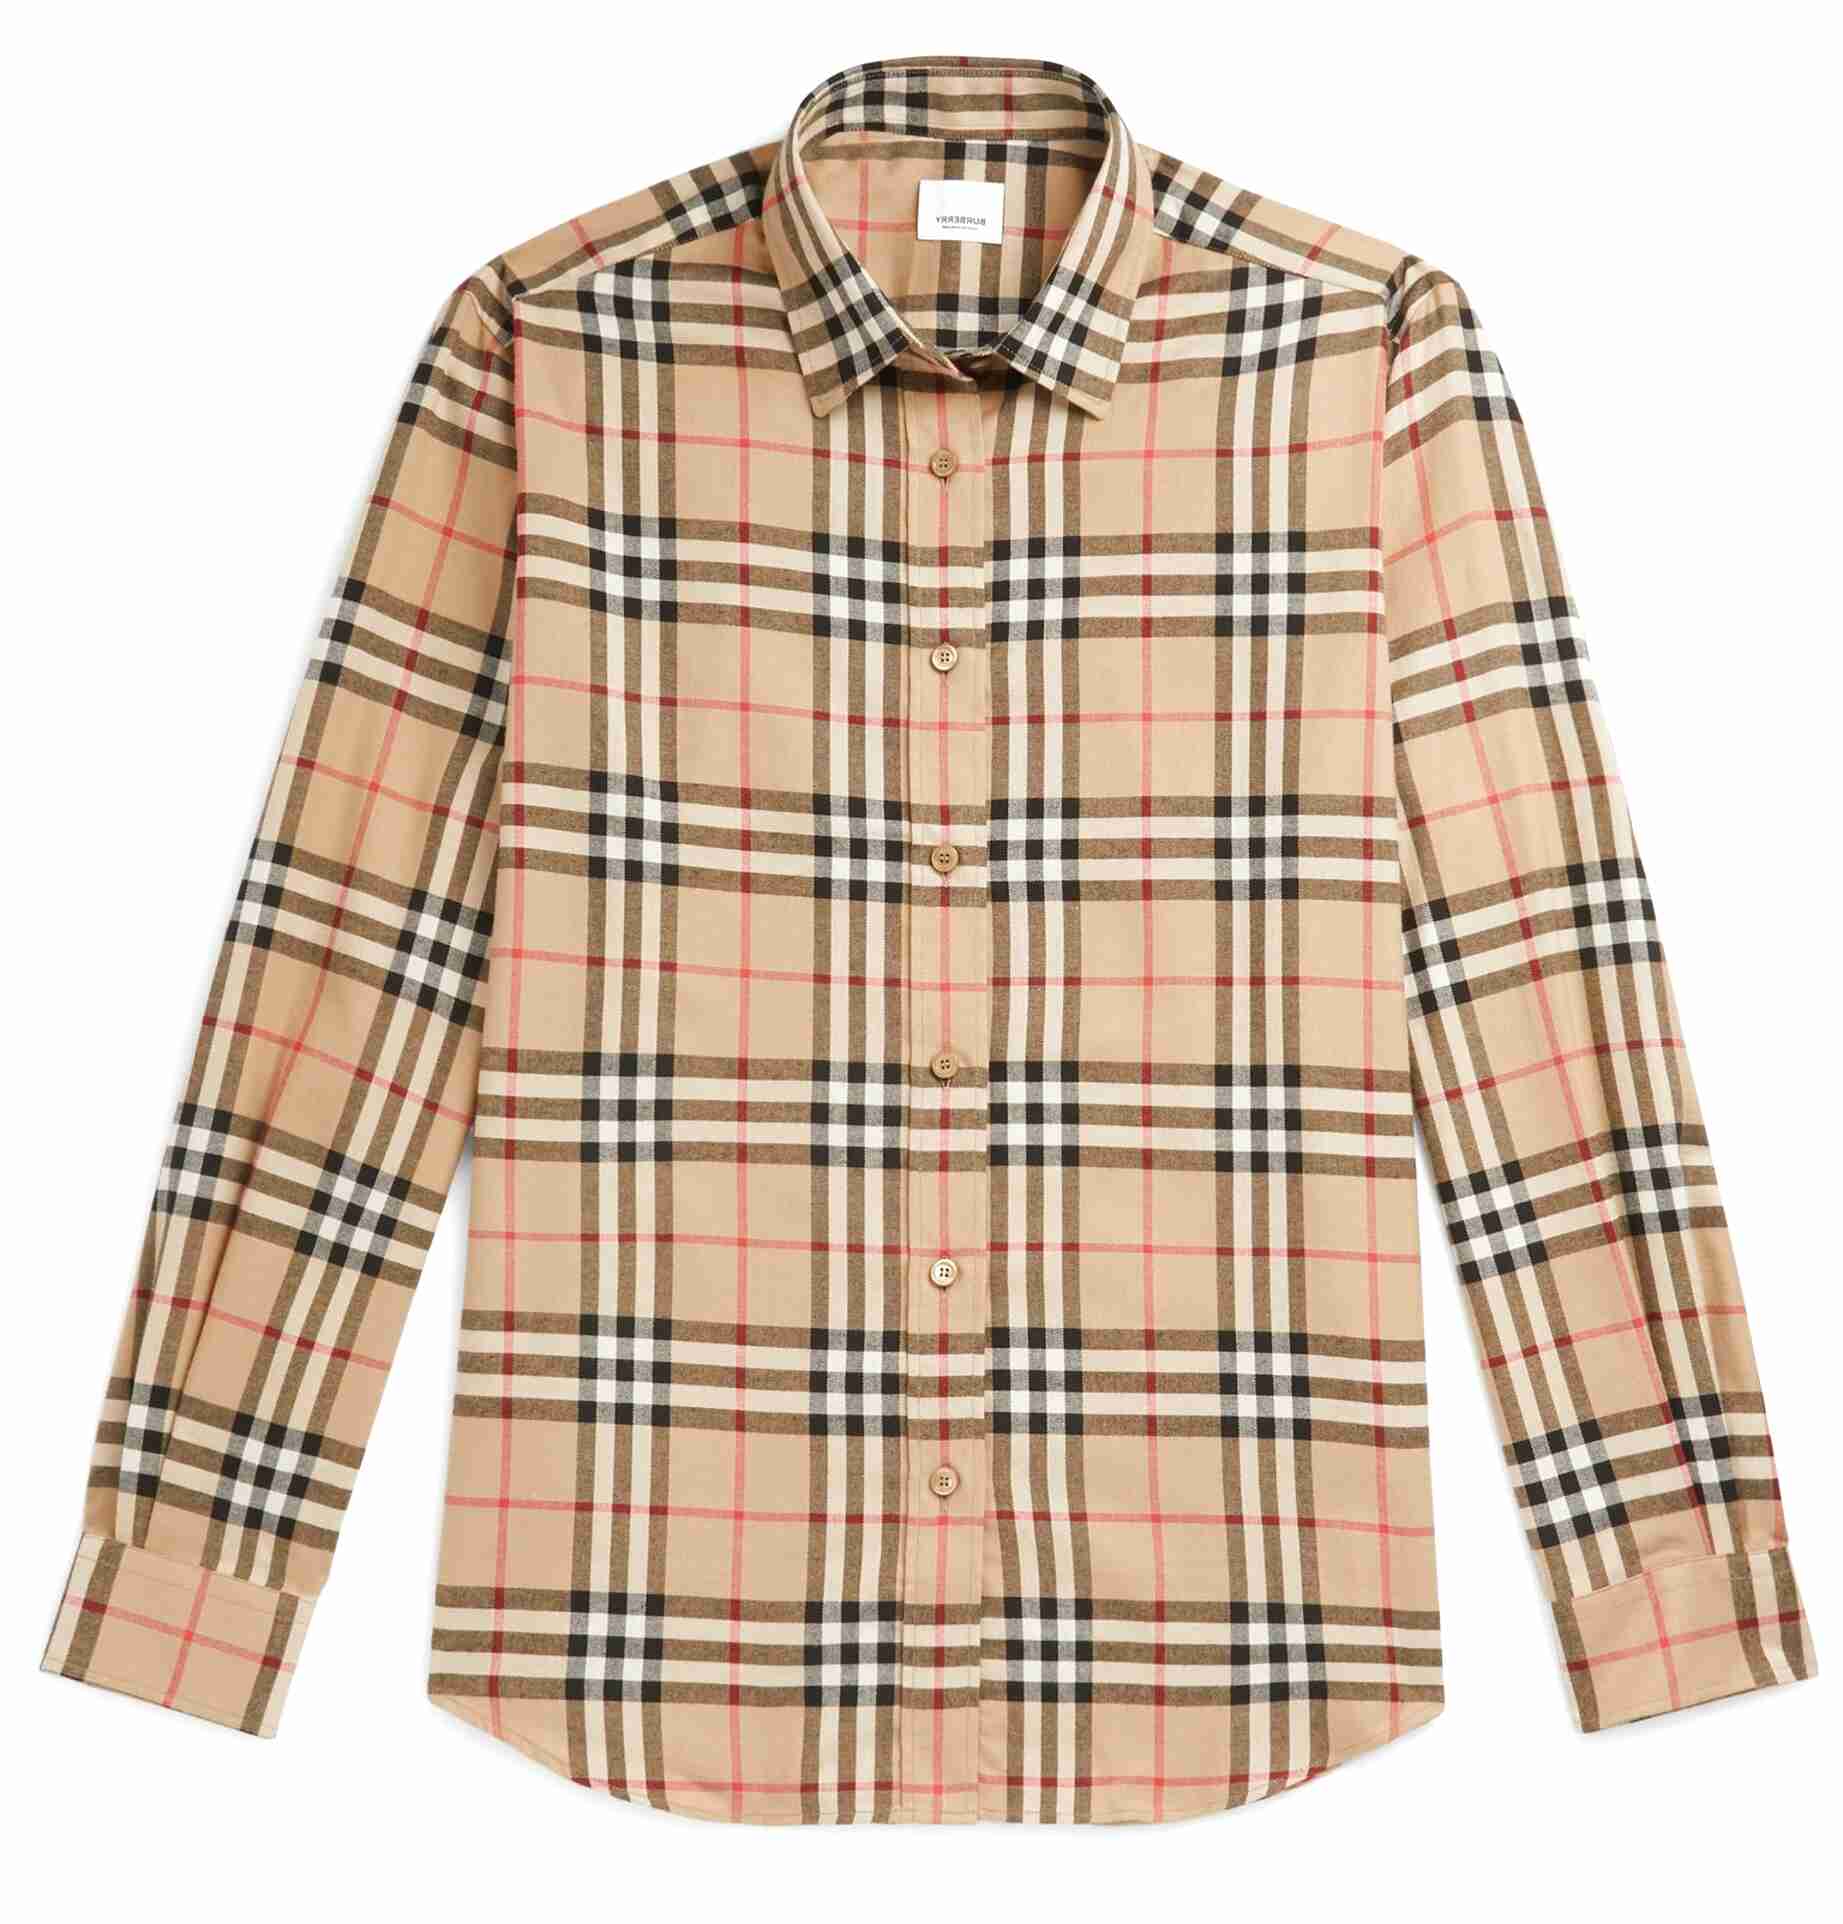 Burberry Shirt for sale in UK | 76 used 